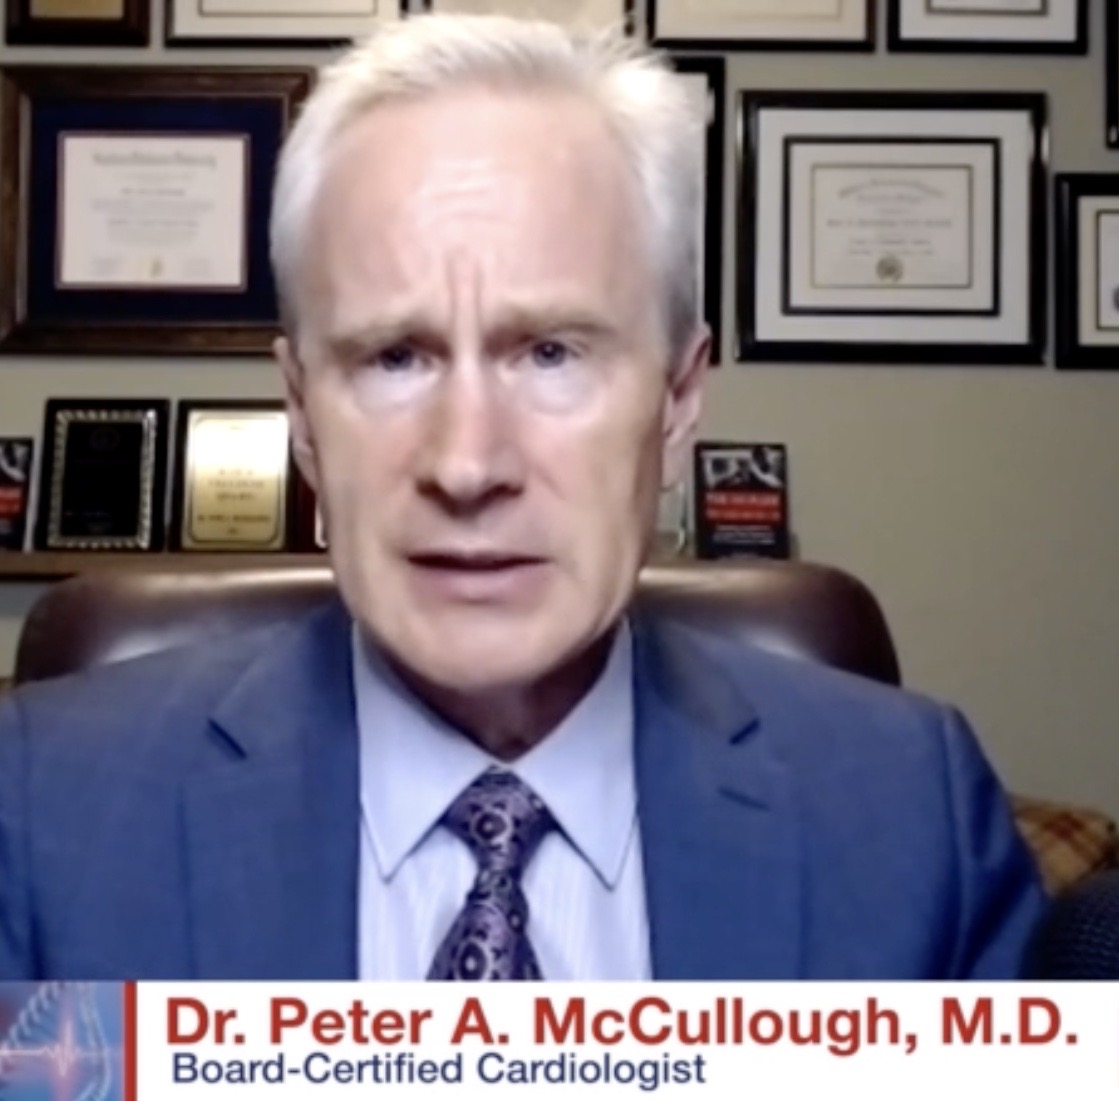 Victory for Dr. Peter McCullough